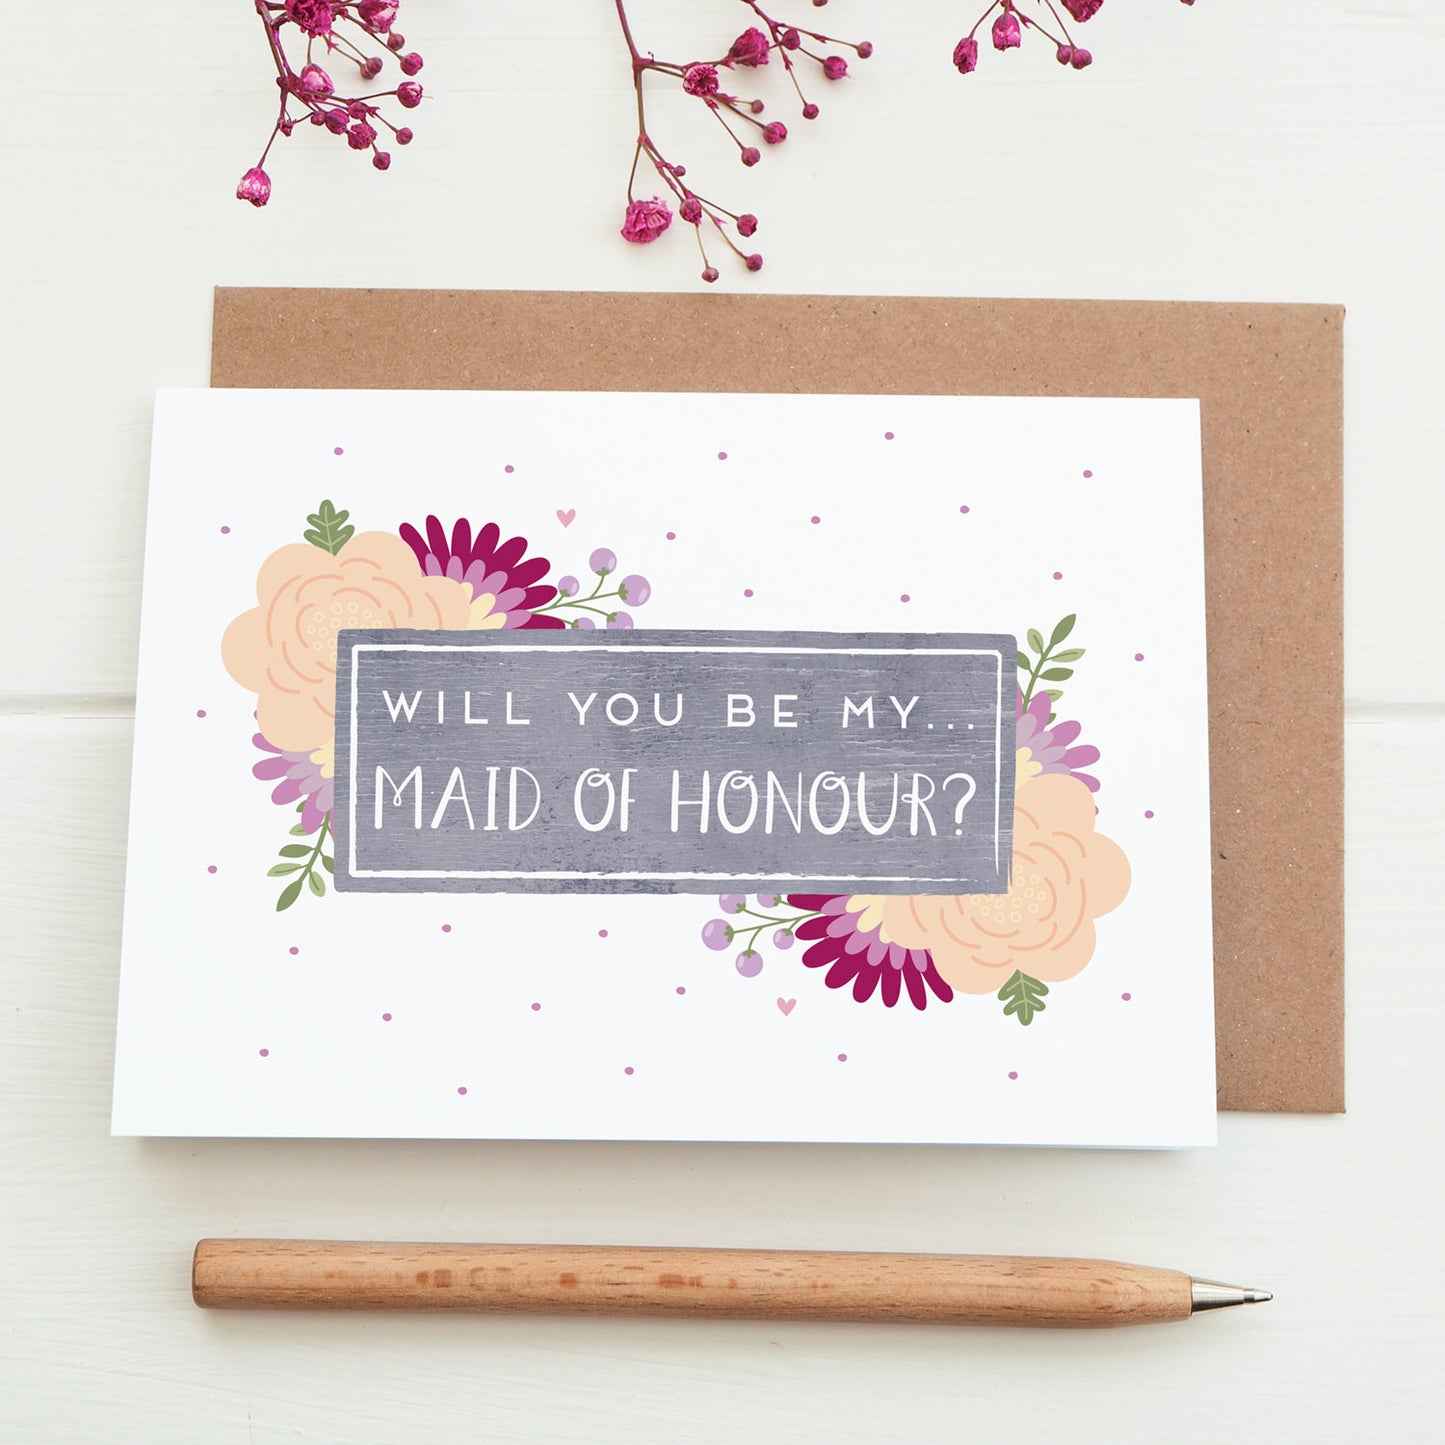 Will you be my maid of honour card in purple